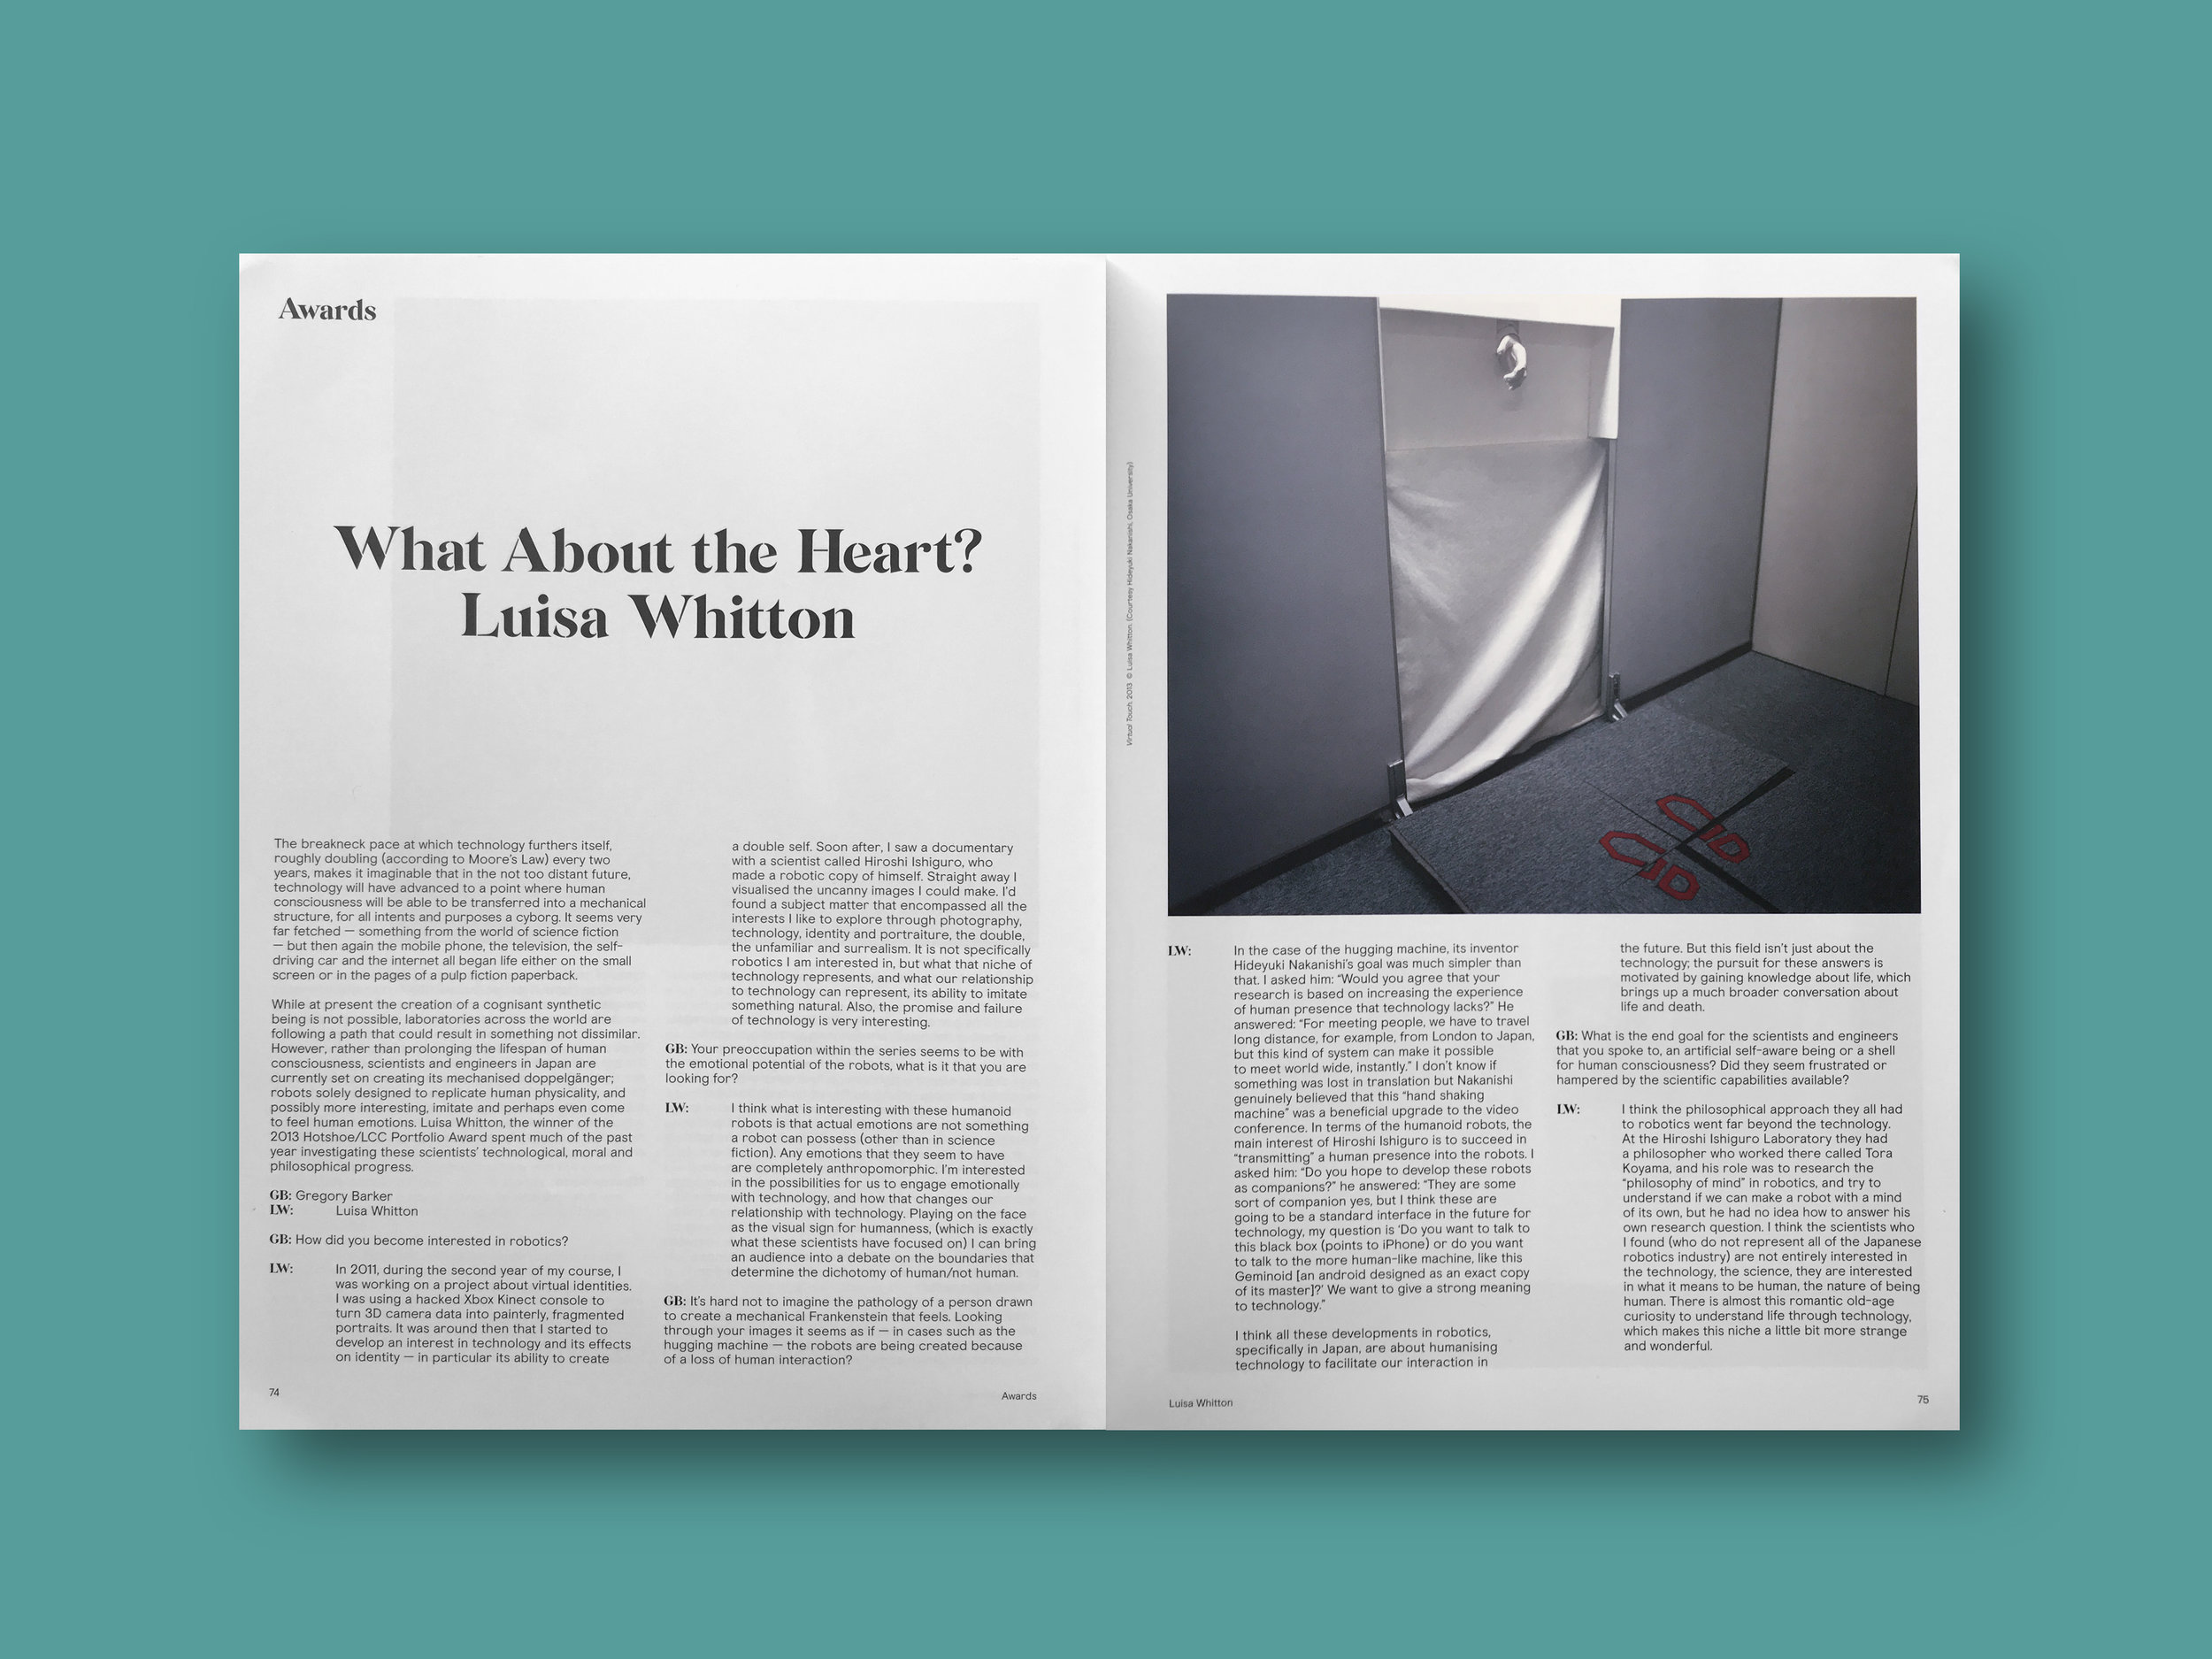   2013   Hotshoe Magazine  (UK) Issue 185  'What About the Heart?'   